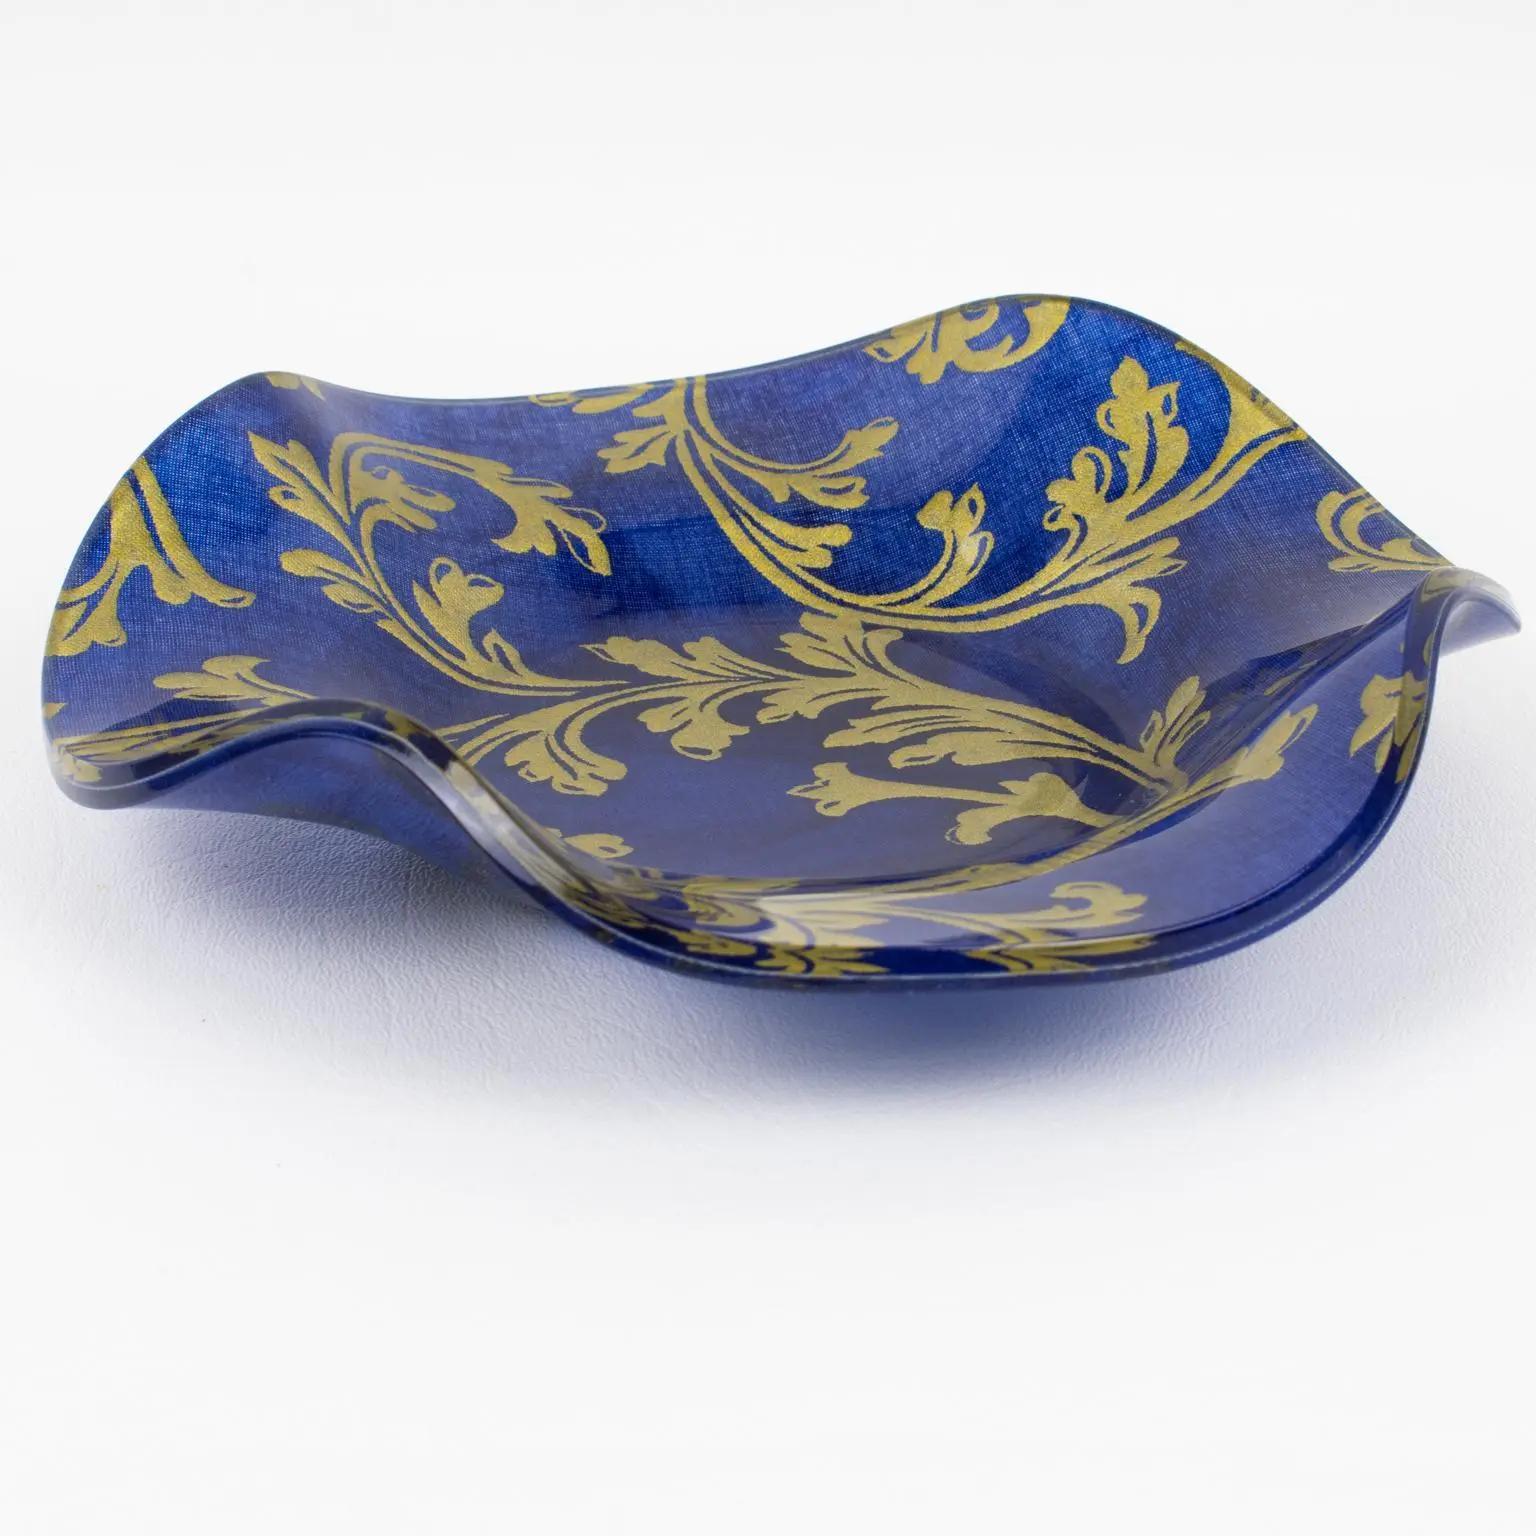 This is a romantic set of two decorative bowls, centerpieces, or catchalls designed for the Christian Dior Home Collection. Rounded scalloped shape in Lucite with authentic cobalt blue and gold Toile de Jouy embedded into the material. The Christian